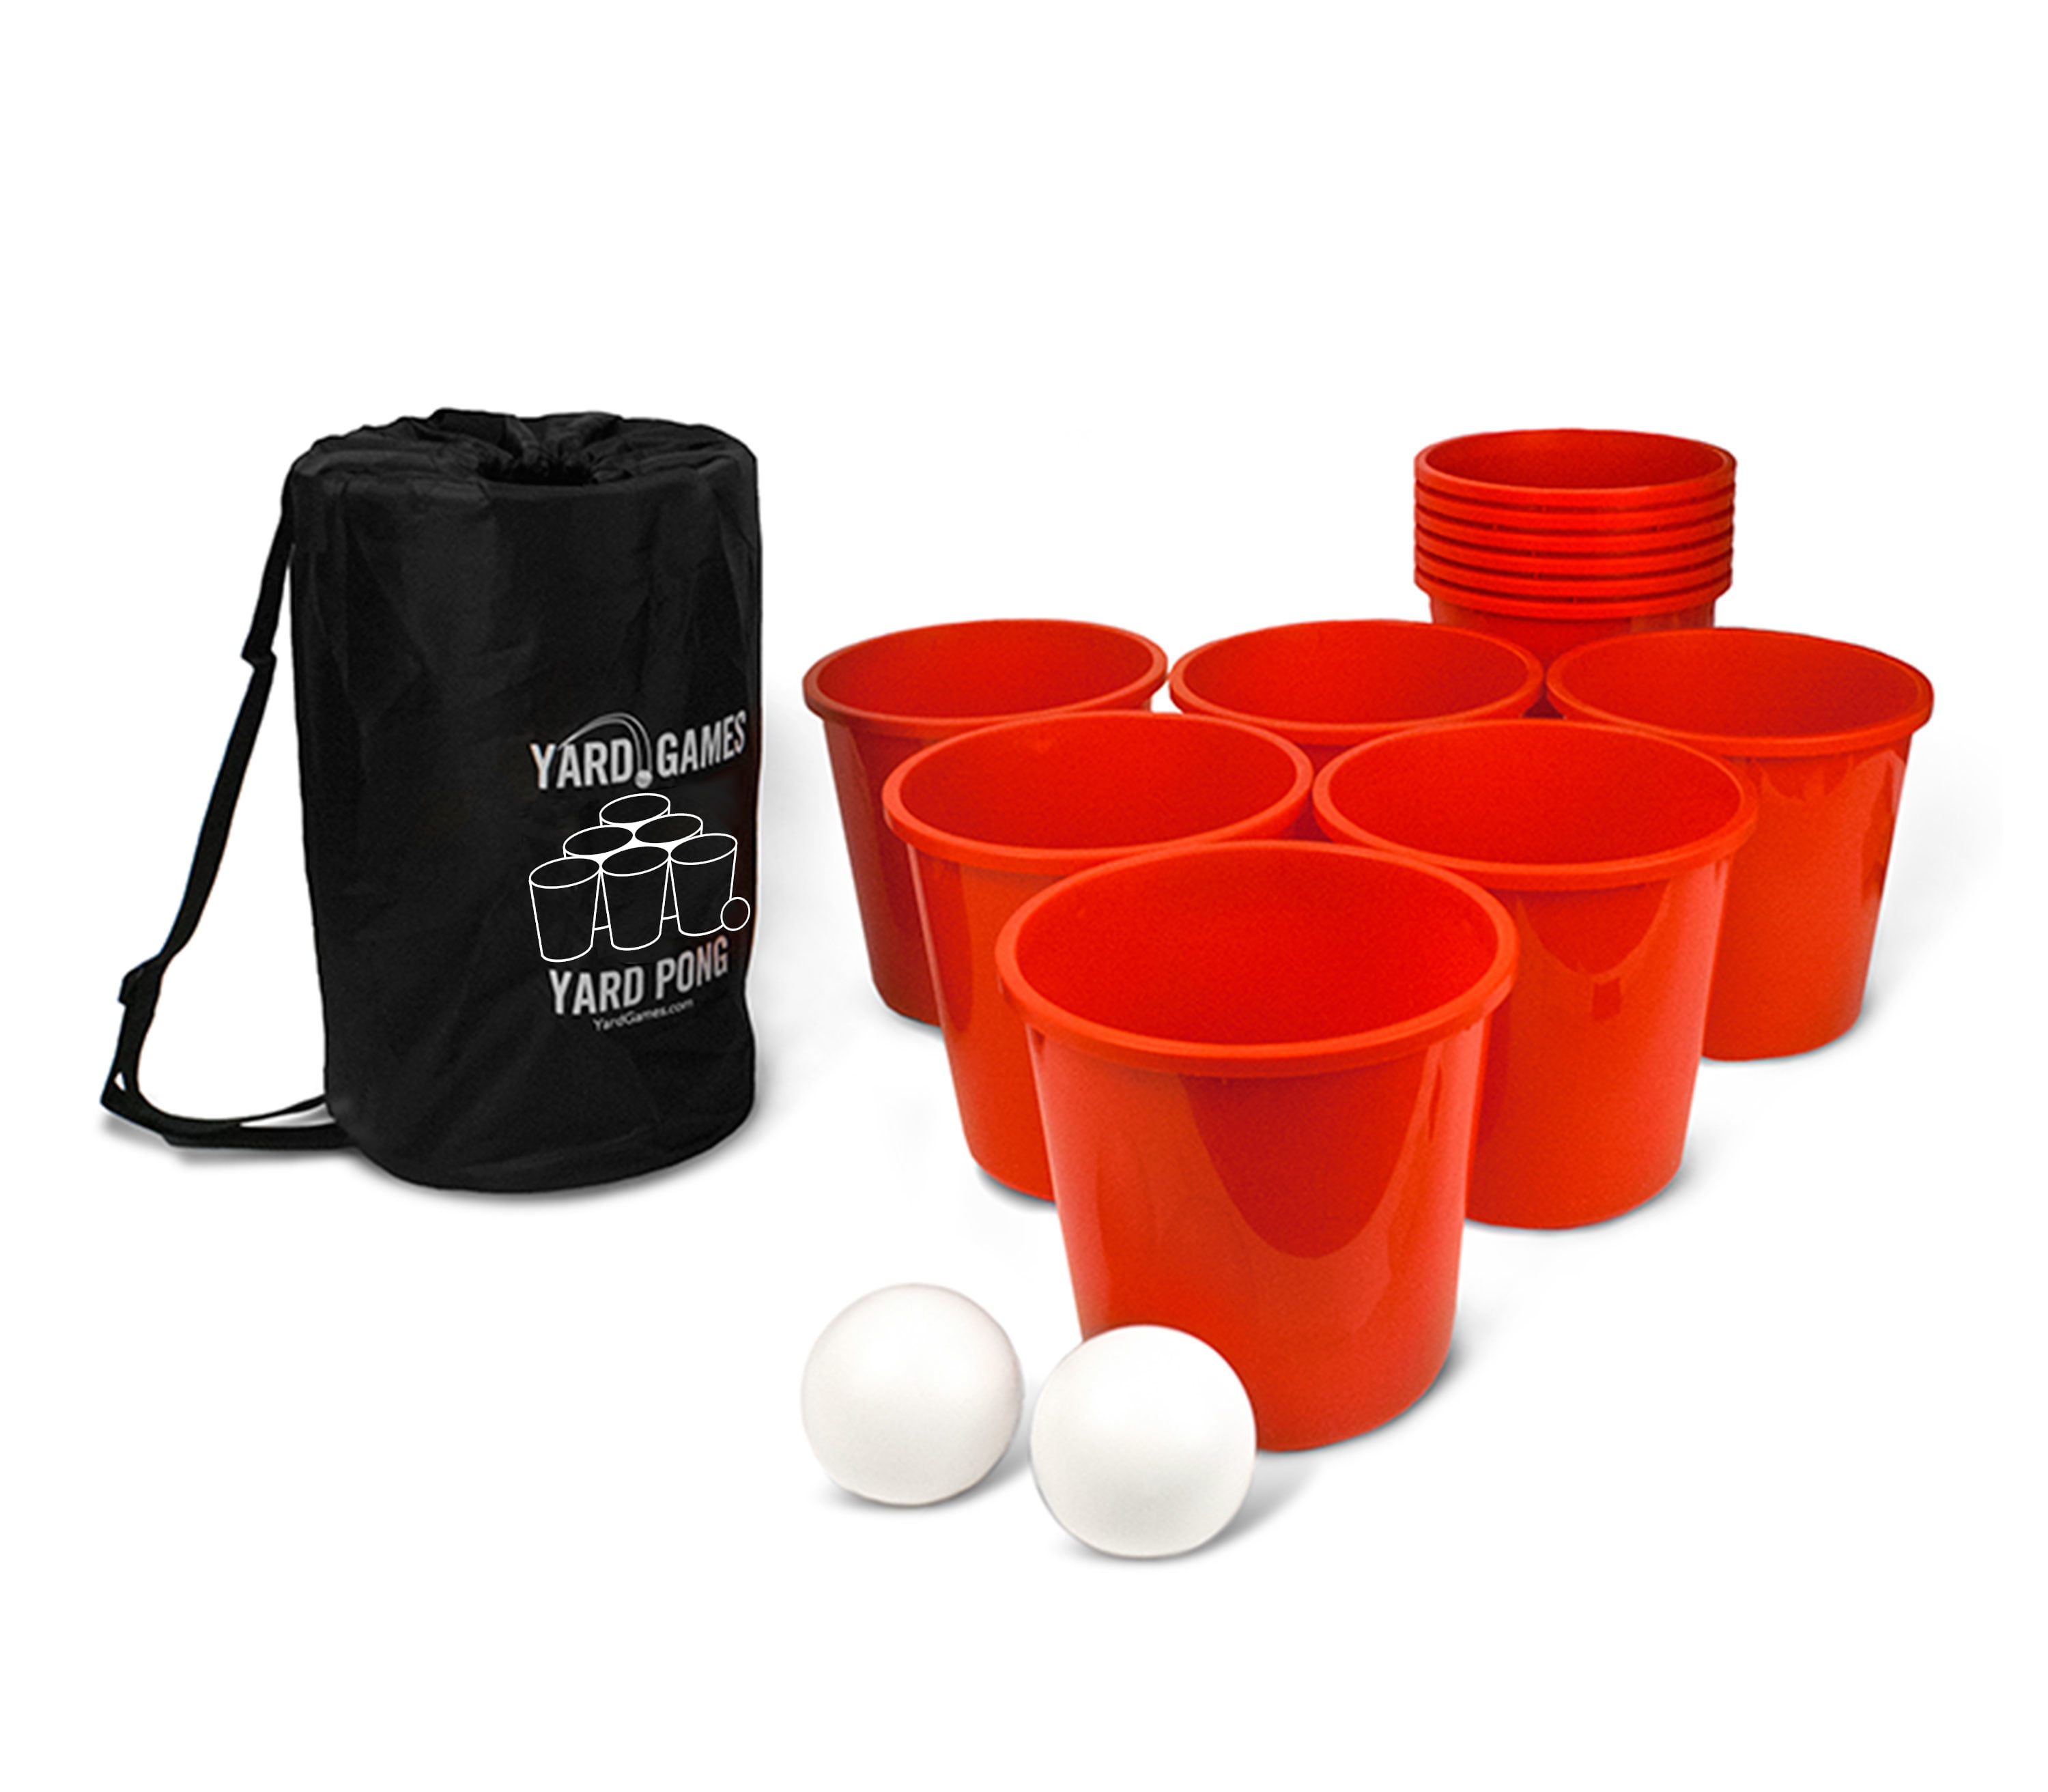 Original Yard Pong Game 12 Color Options Team Color Edition Ultimate Tailgate Game BucketBall 